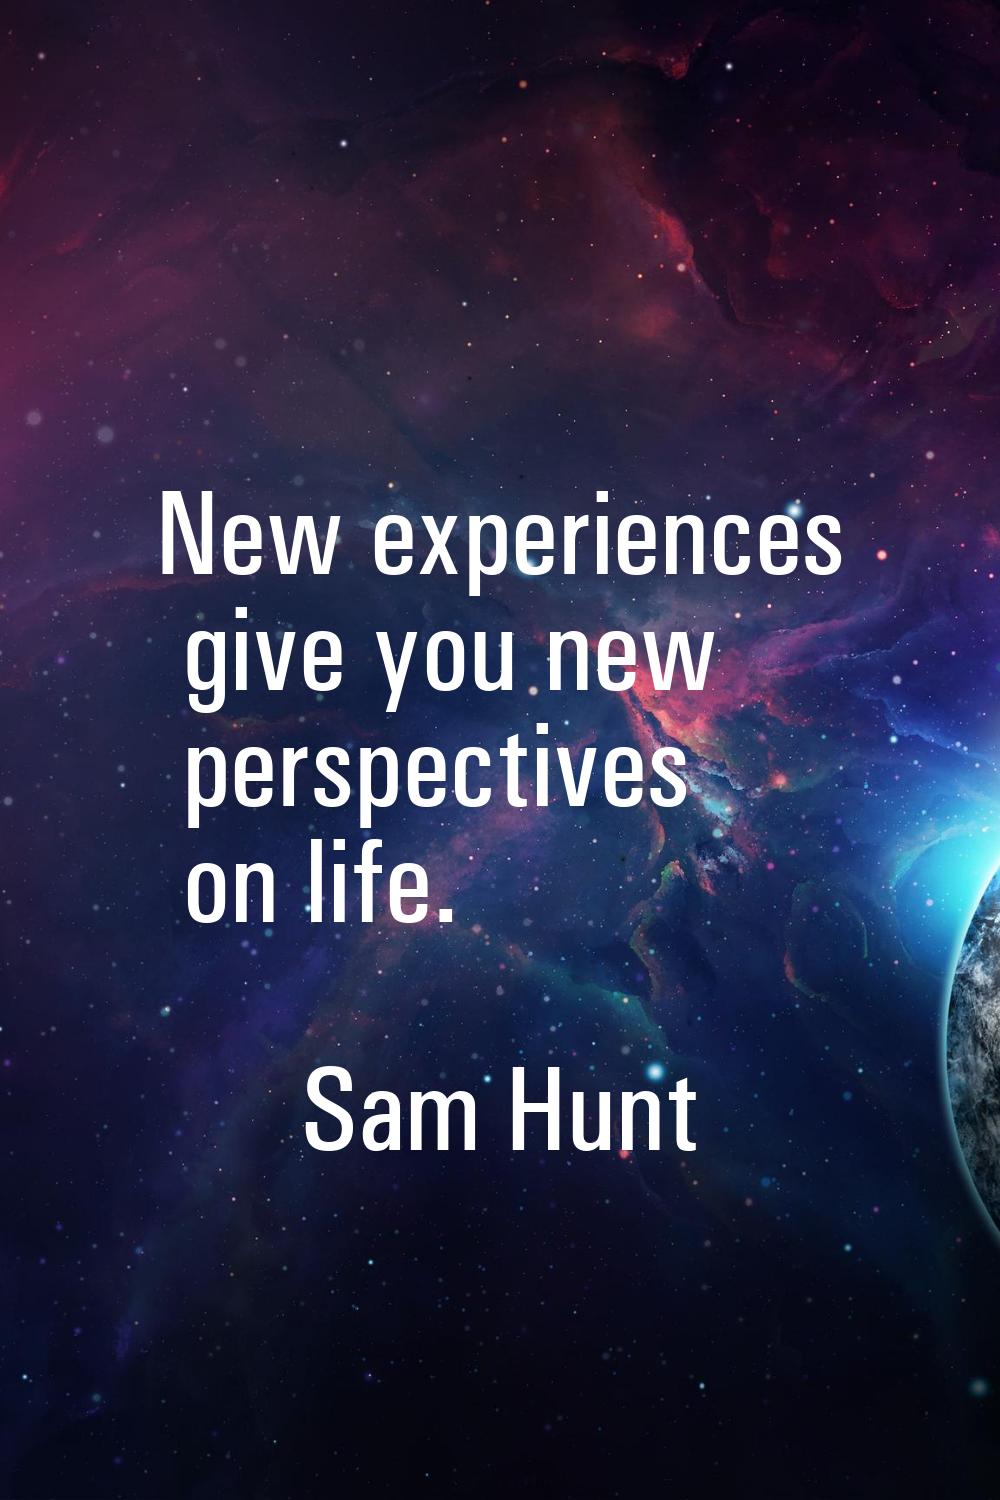 New experiences give you new perspectives on life.